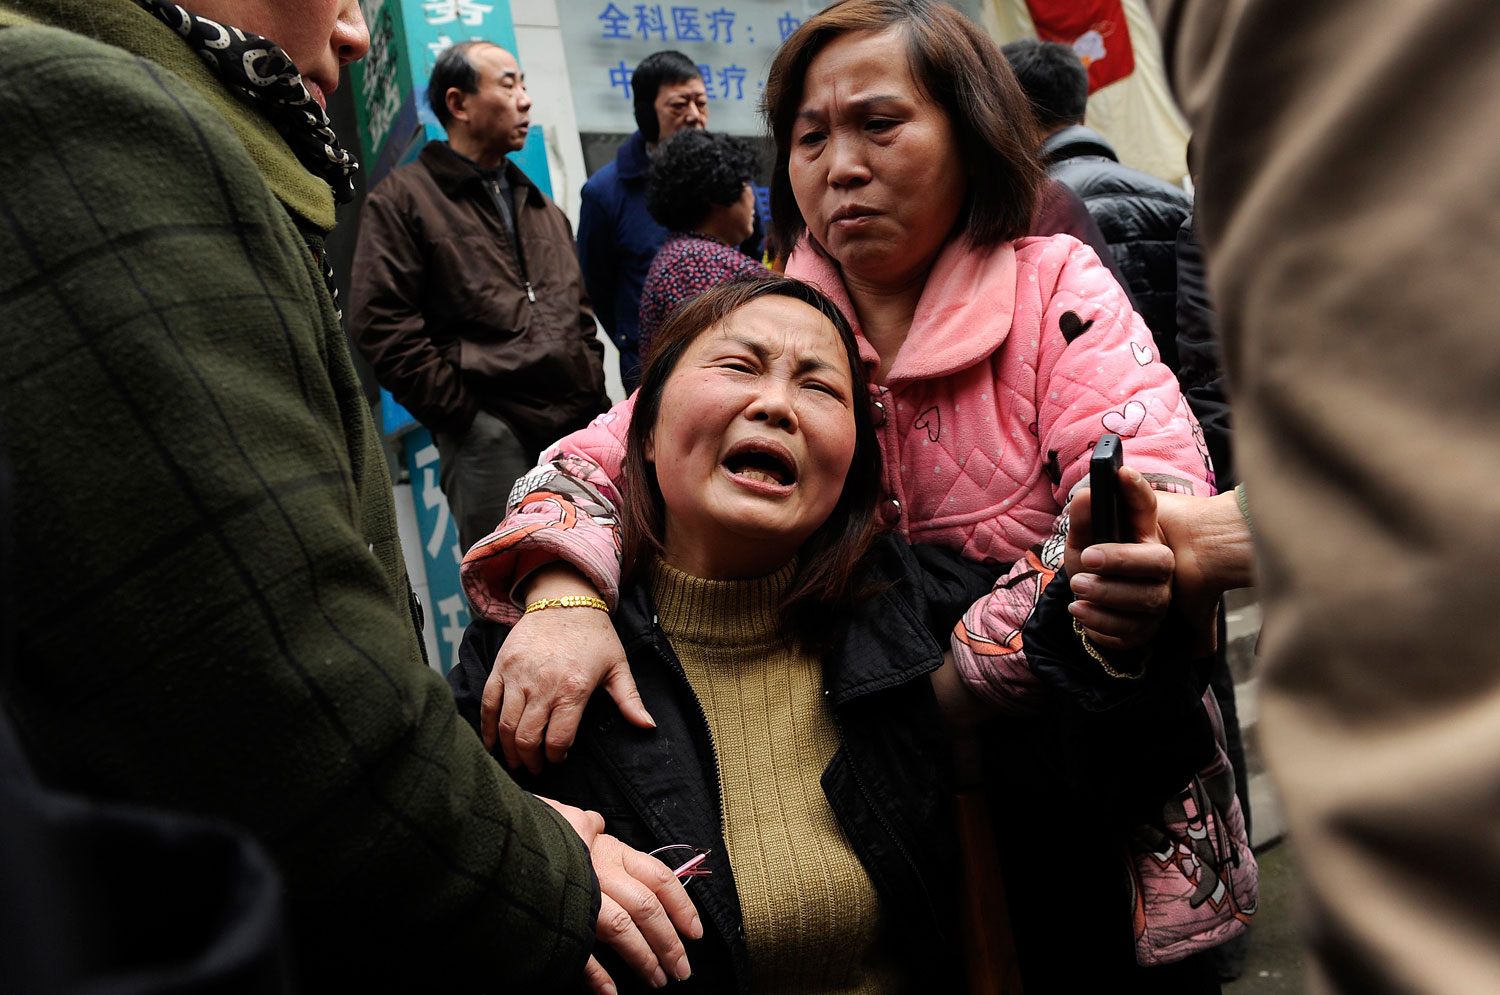 A woman cries after her parent was killed in a knifing incident in Changsha, Hunan province March 14, 2014.